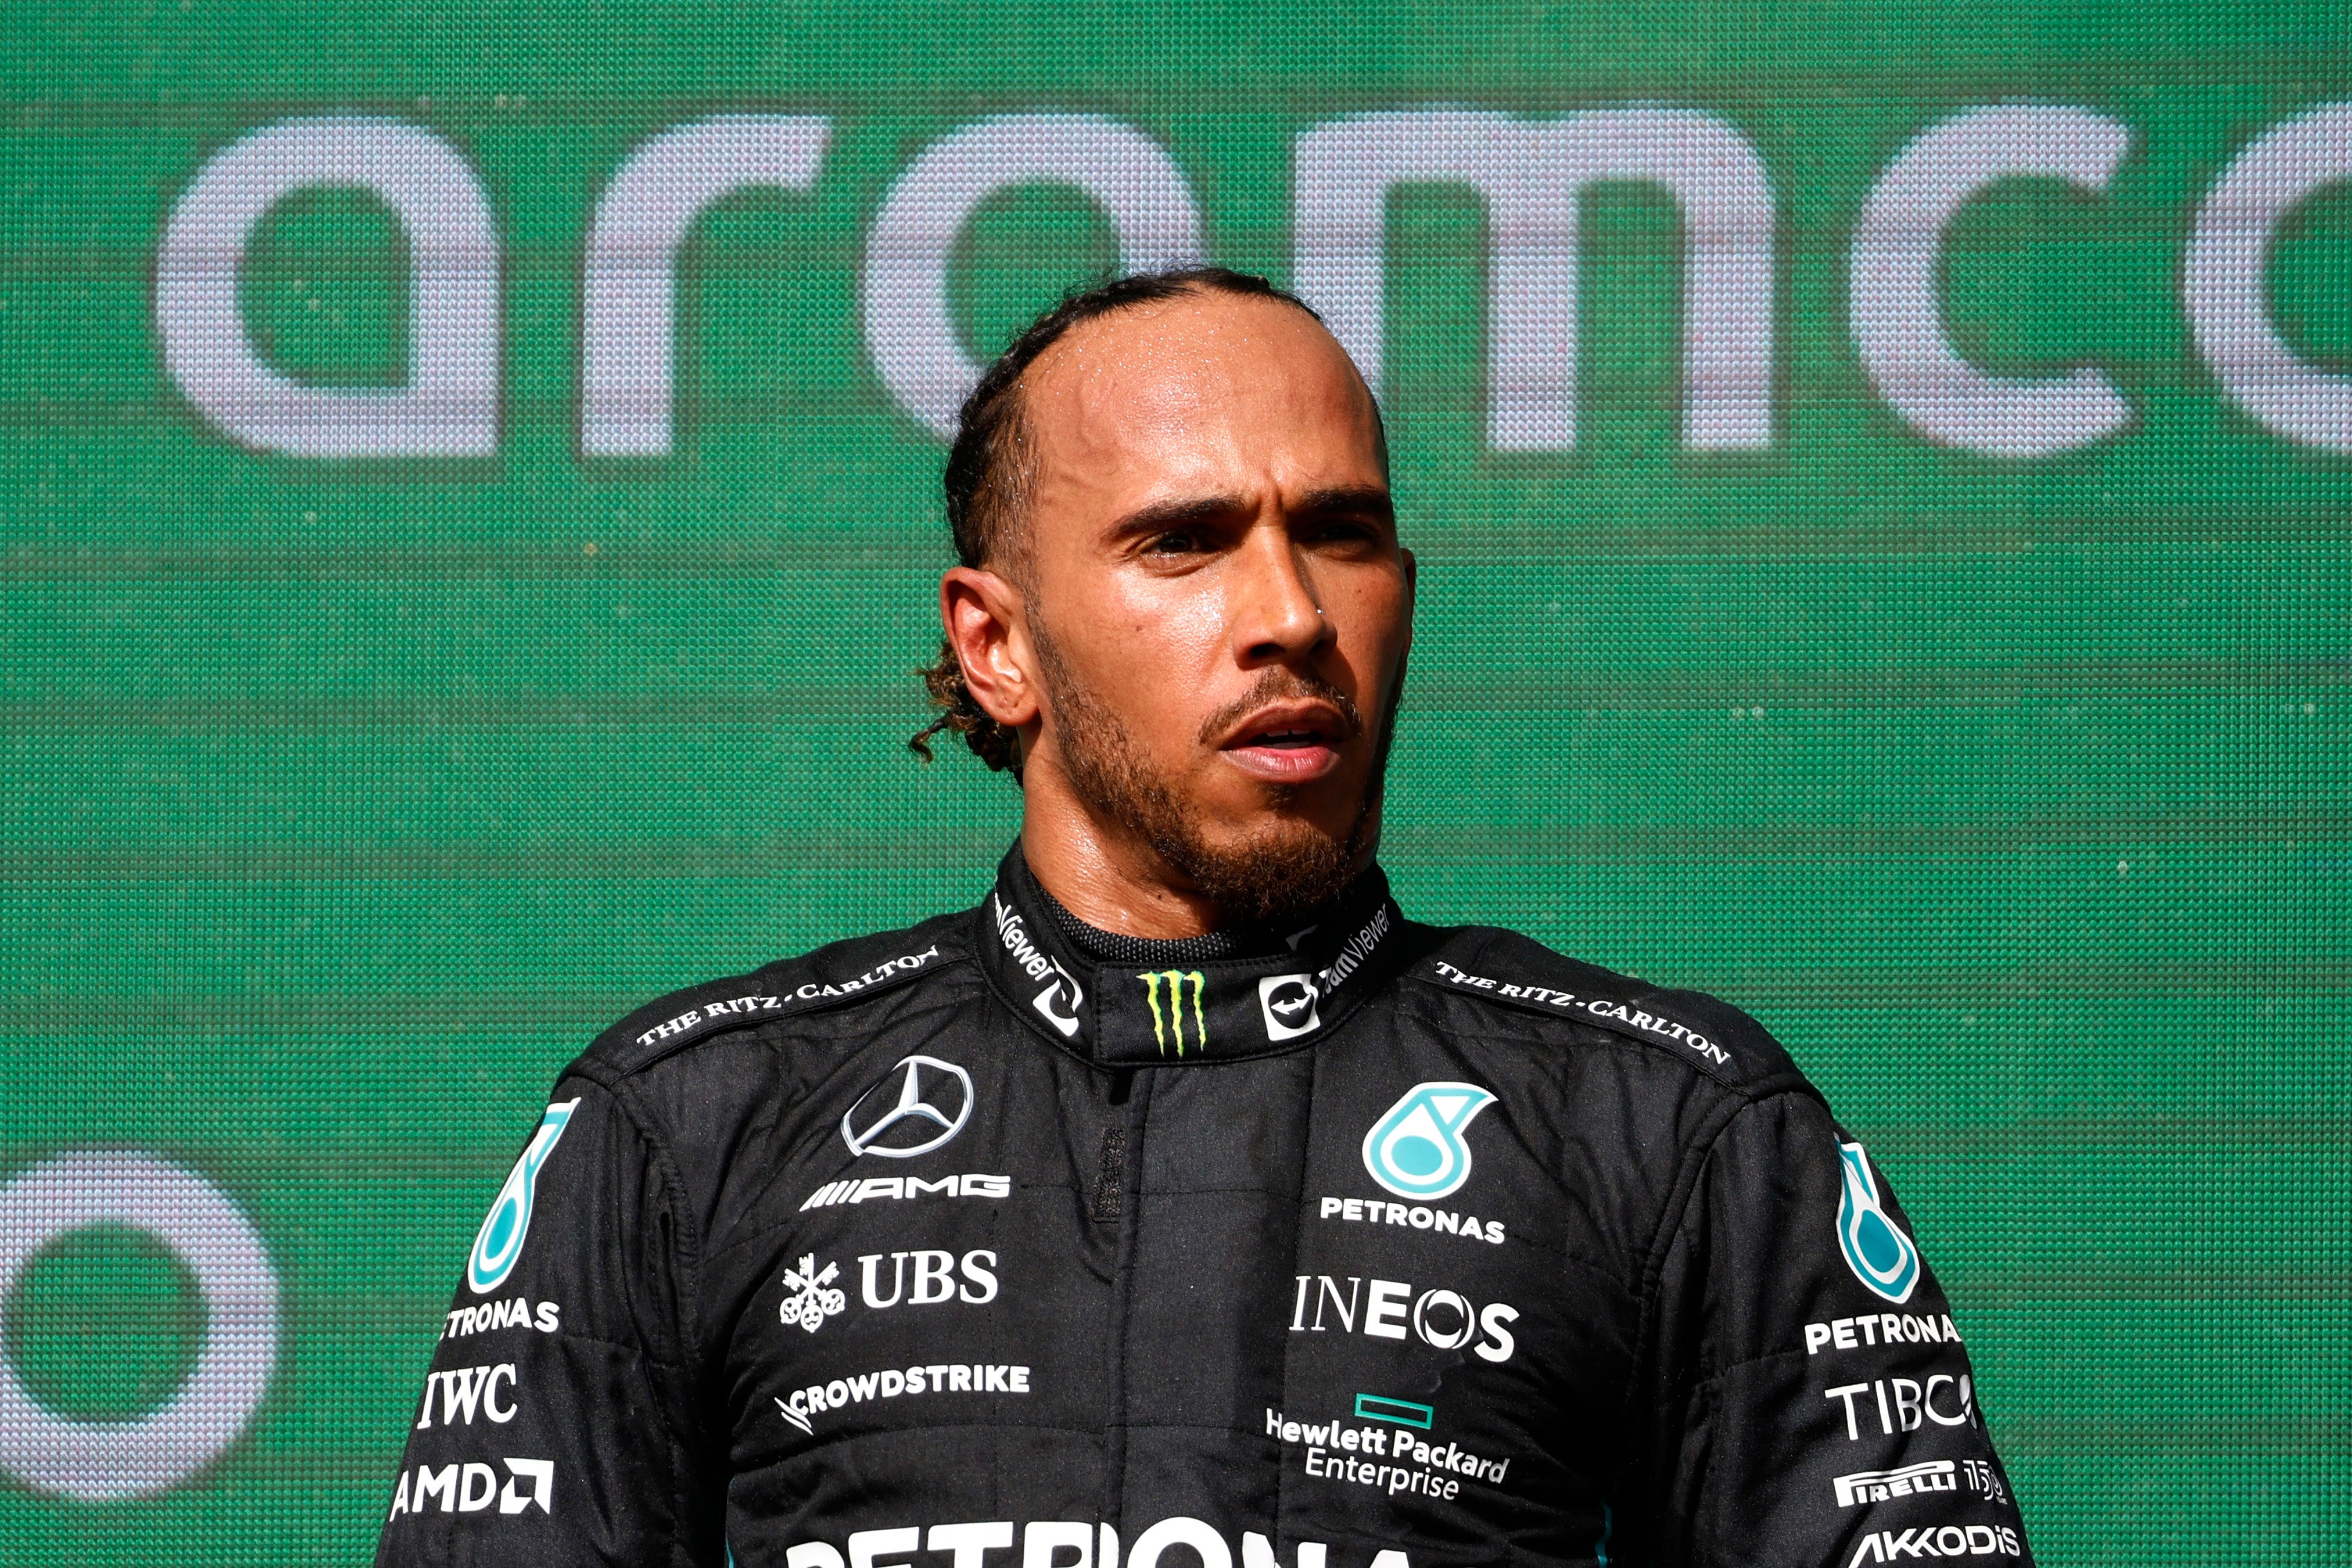 Hamilton’s hunt for a race win in 2022 goes on